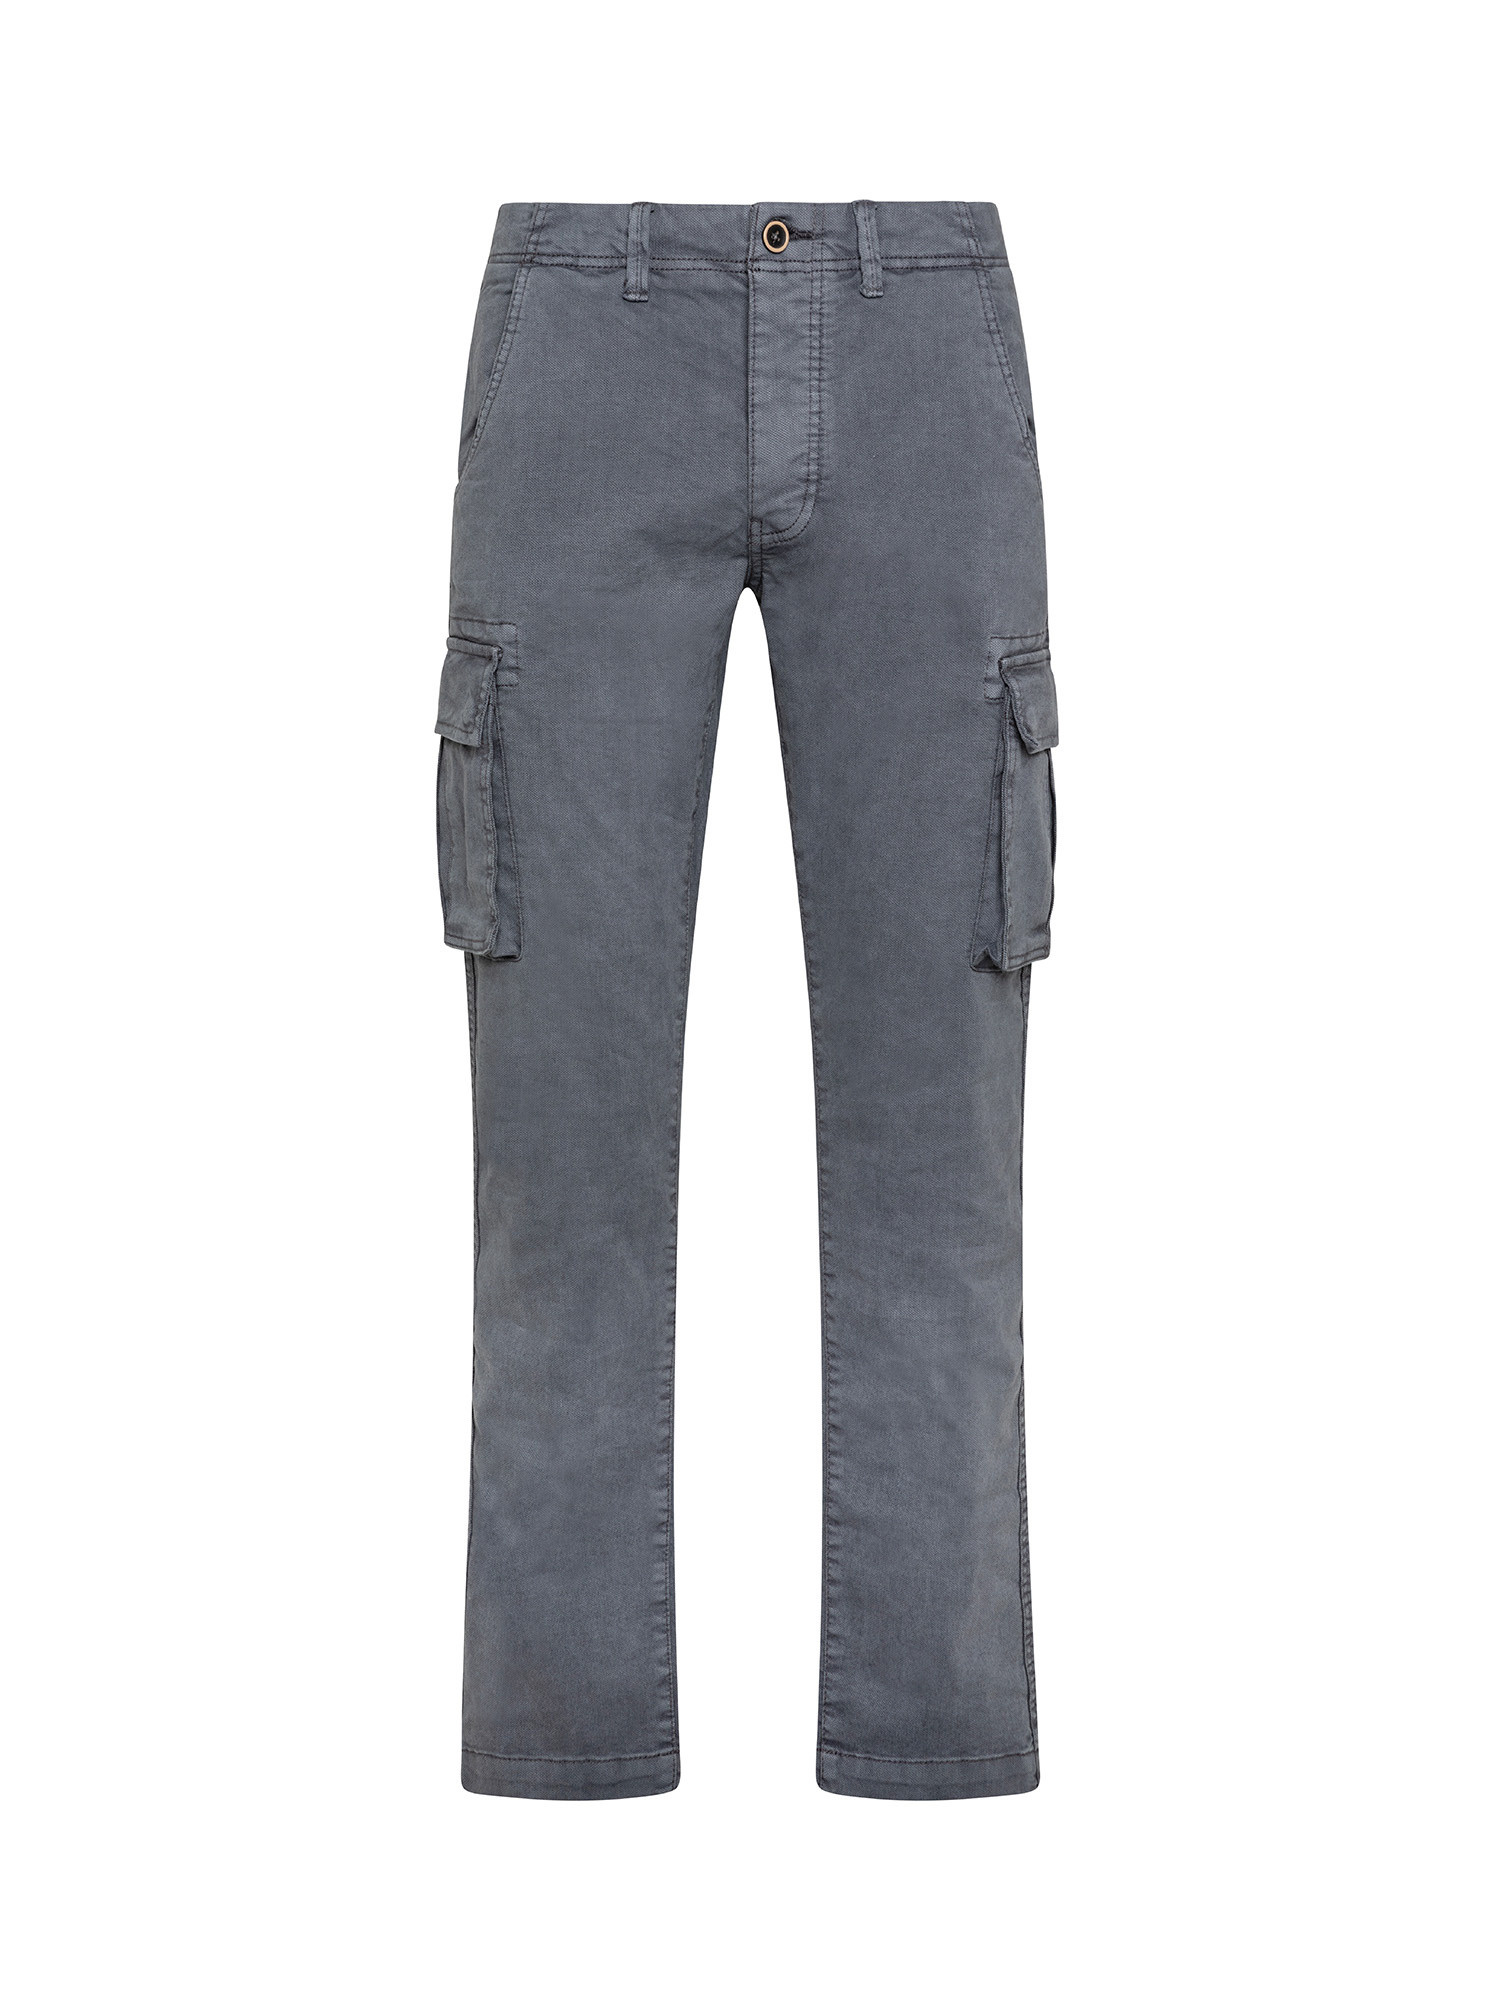 JCT - Slim fit cargo trousers, Dark Grey, large image number 0